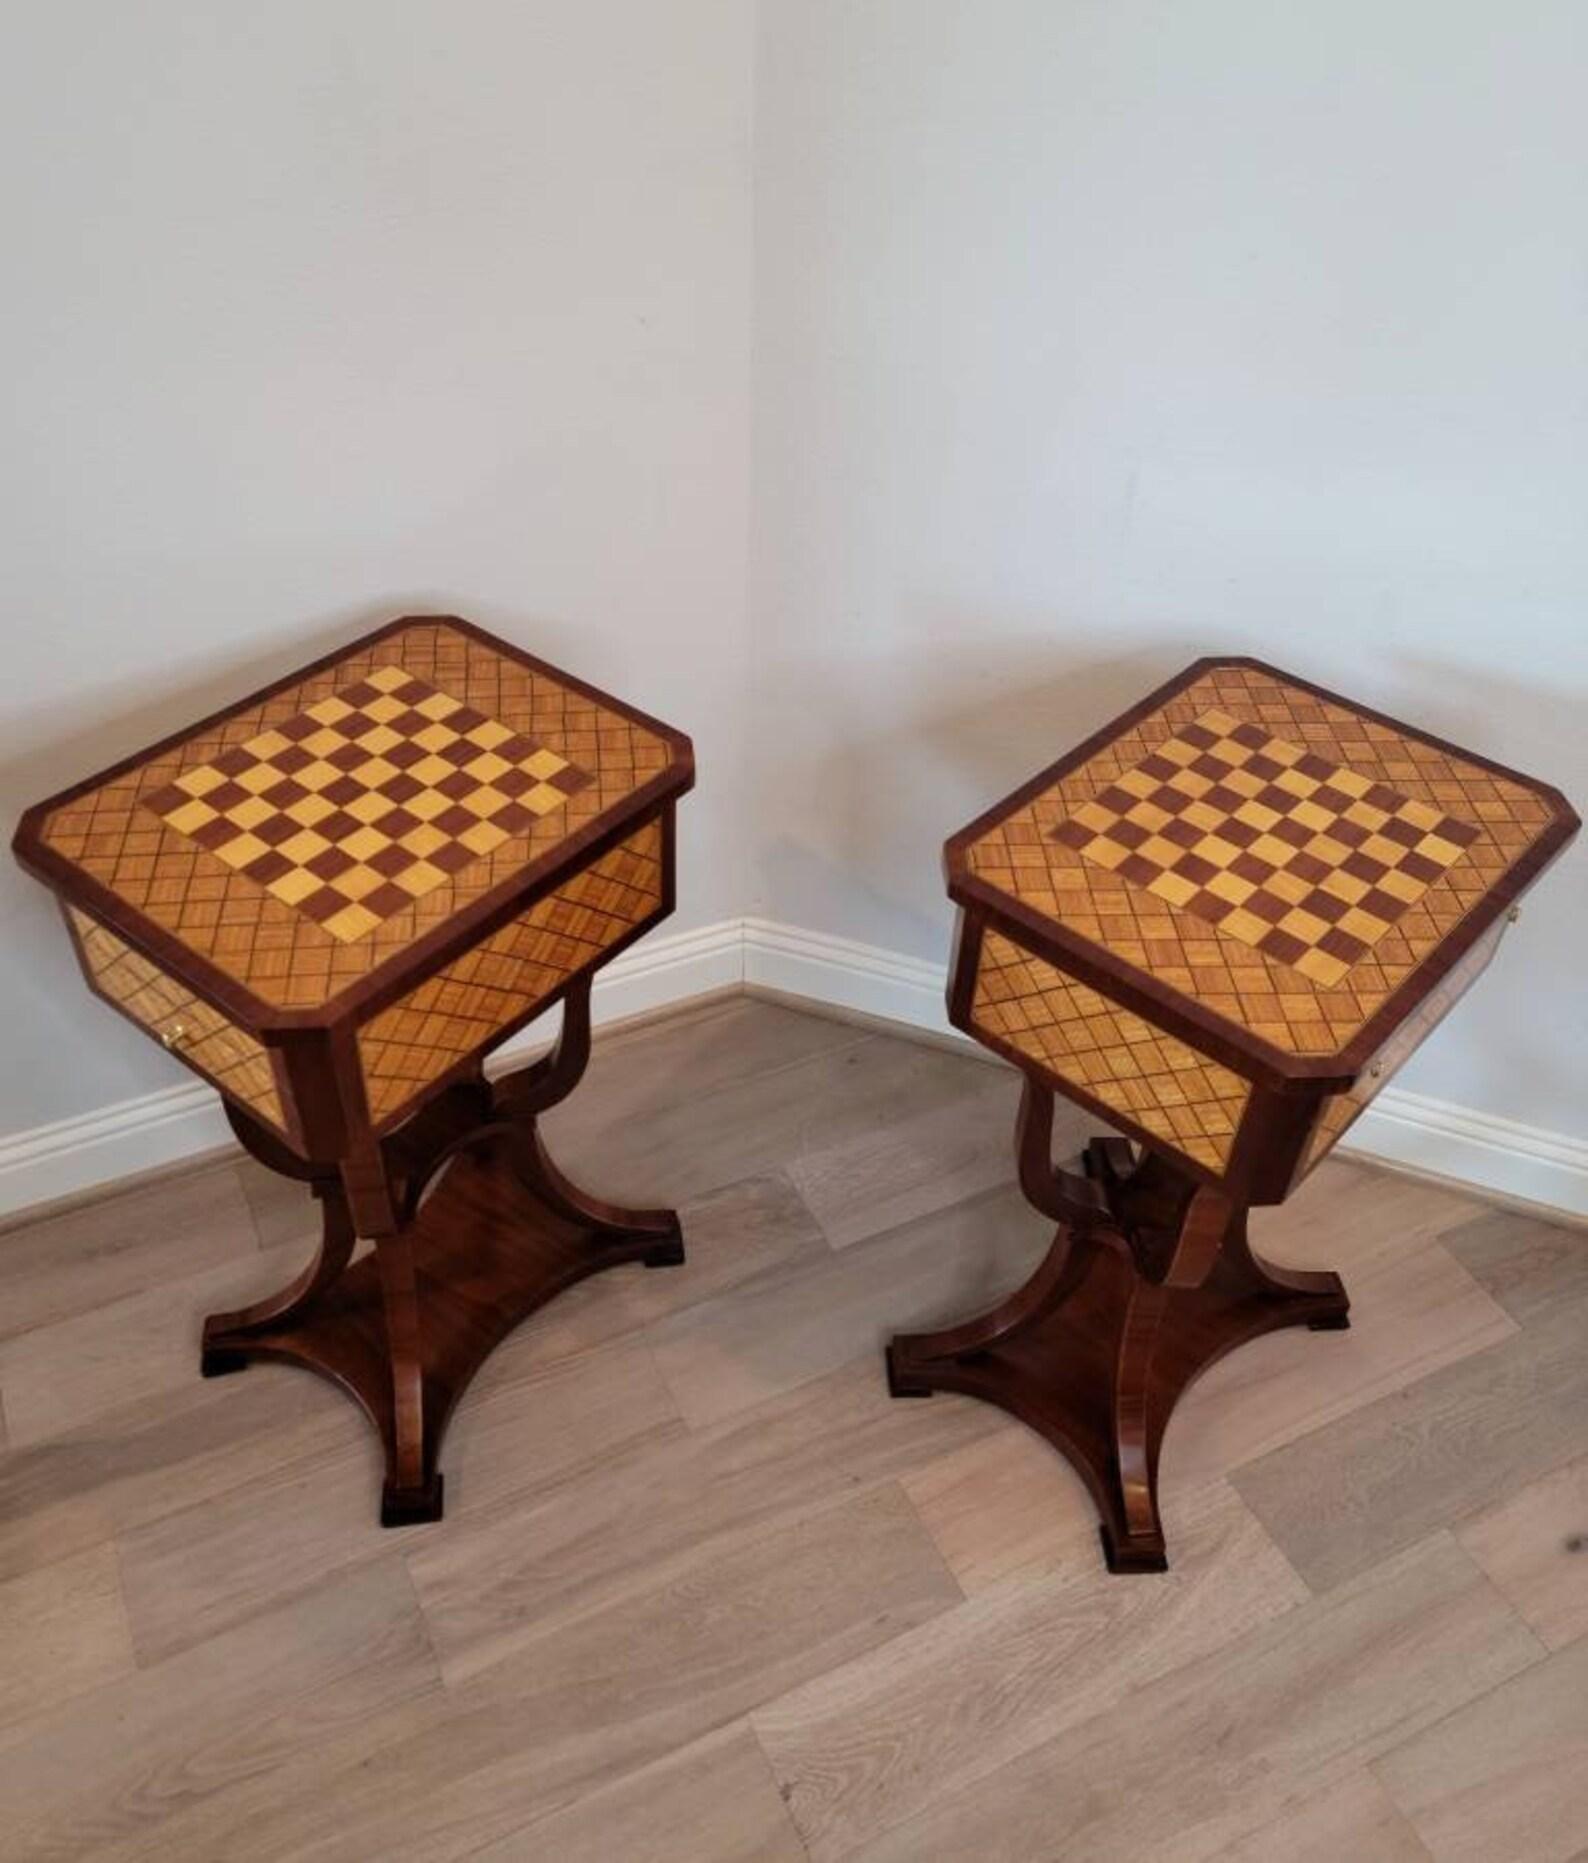 A most impressive pair of Italian parquetry inlaid mahogany lift-top work tables (side table - end table - bedside nightstand) with warm, nicely aged patina. circa 1920s/1930s

What we love most about these tables is the elegant, sophisticated,